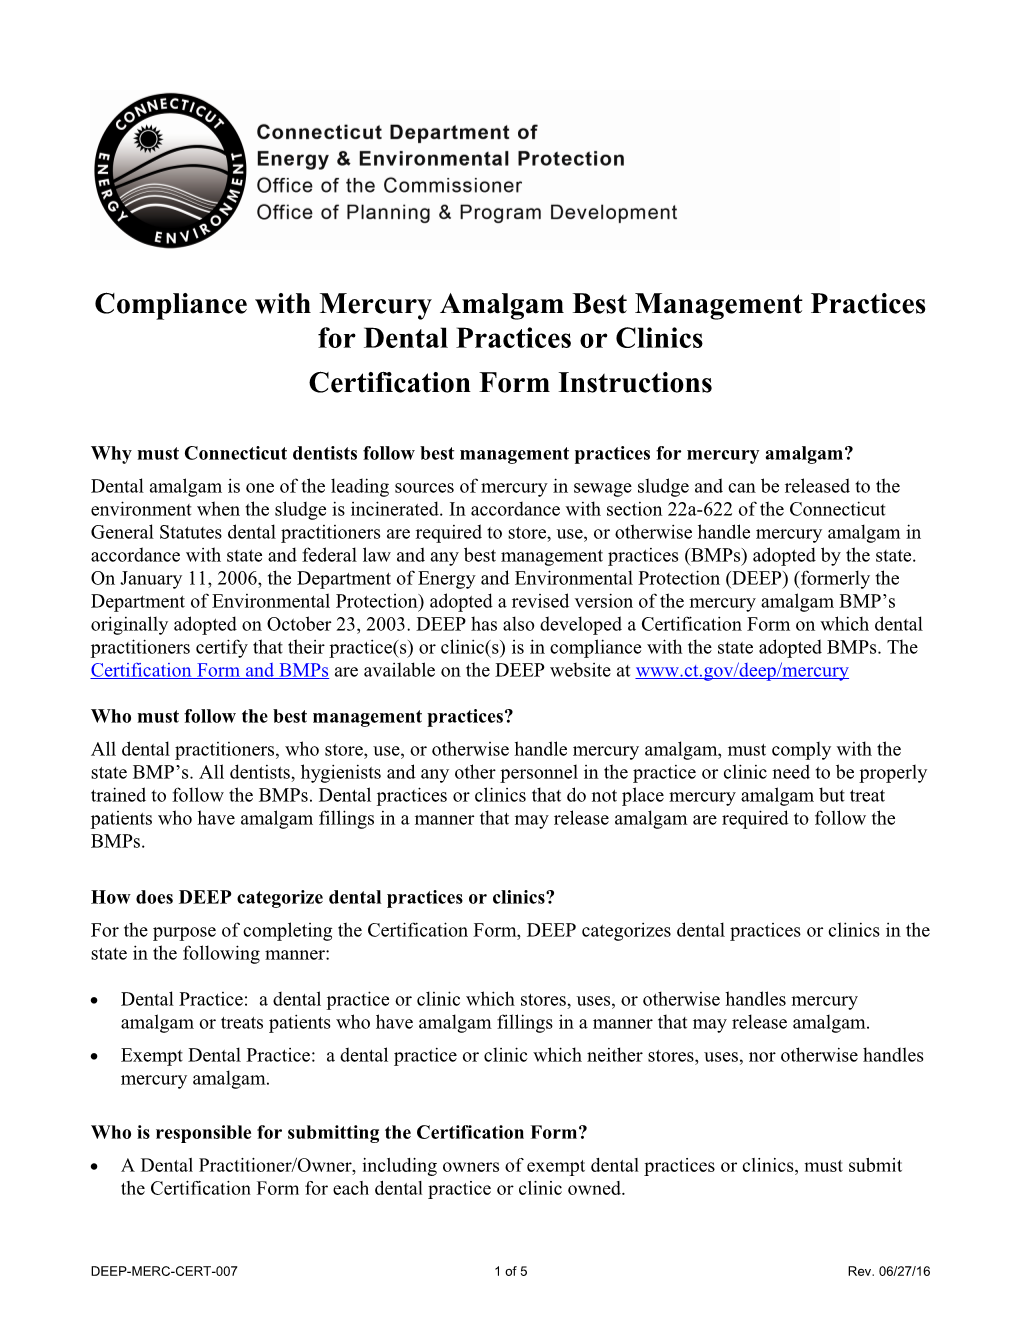 Compliance With Best Management Practices For Dental Offices – Certification Form